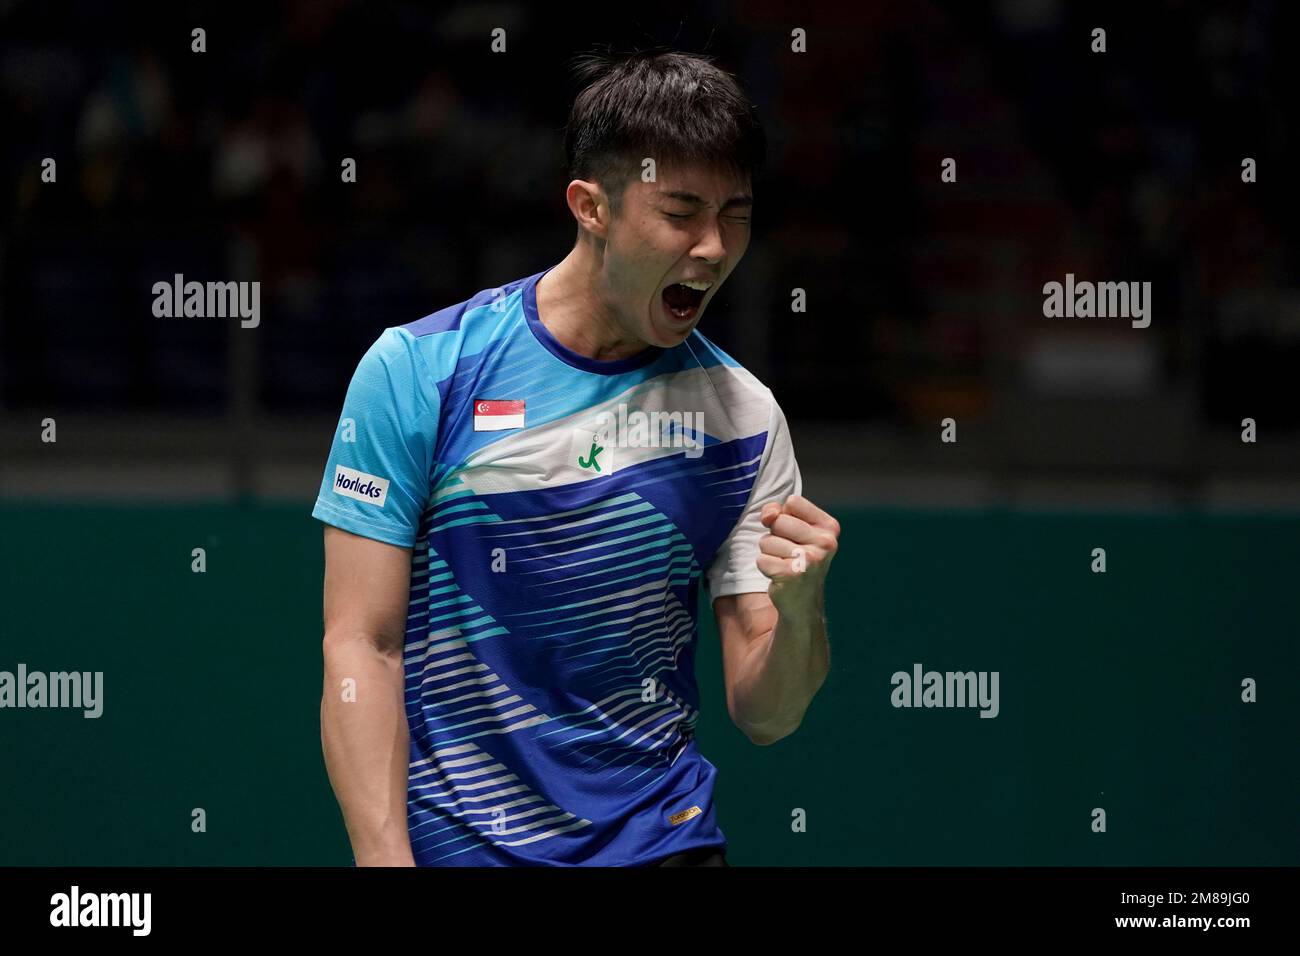 Singapores Loh Kean Yew reacts during his mens singles quarterfinals match against Thailands Kunlavut Vitidsarn at the Malaysia Open badminton tournament at the Bukit Jalil Axiata Arena in Kuala Lumpur, Malaysia, Friday,